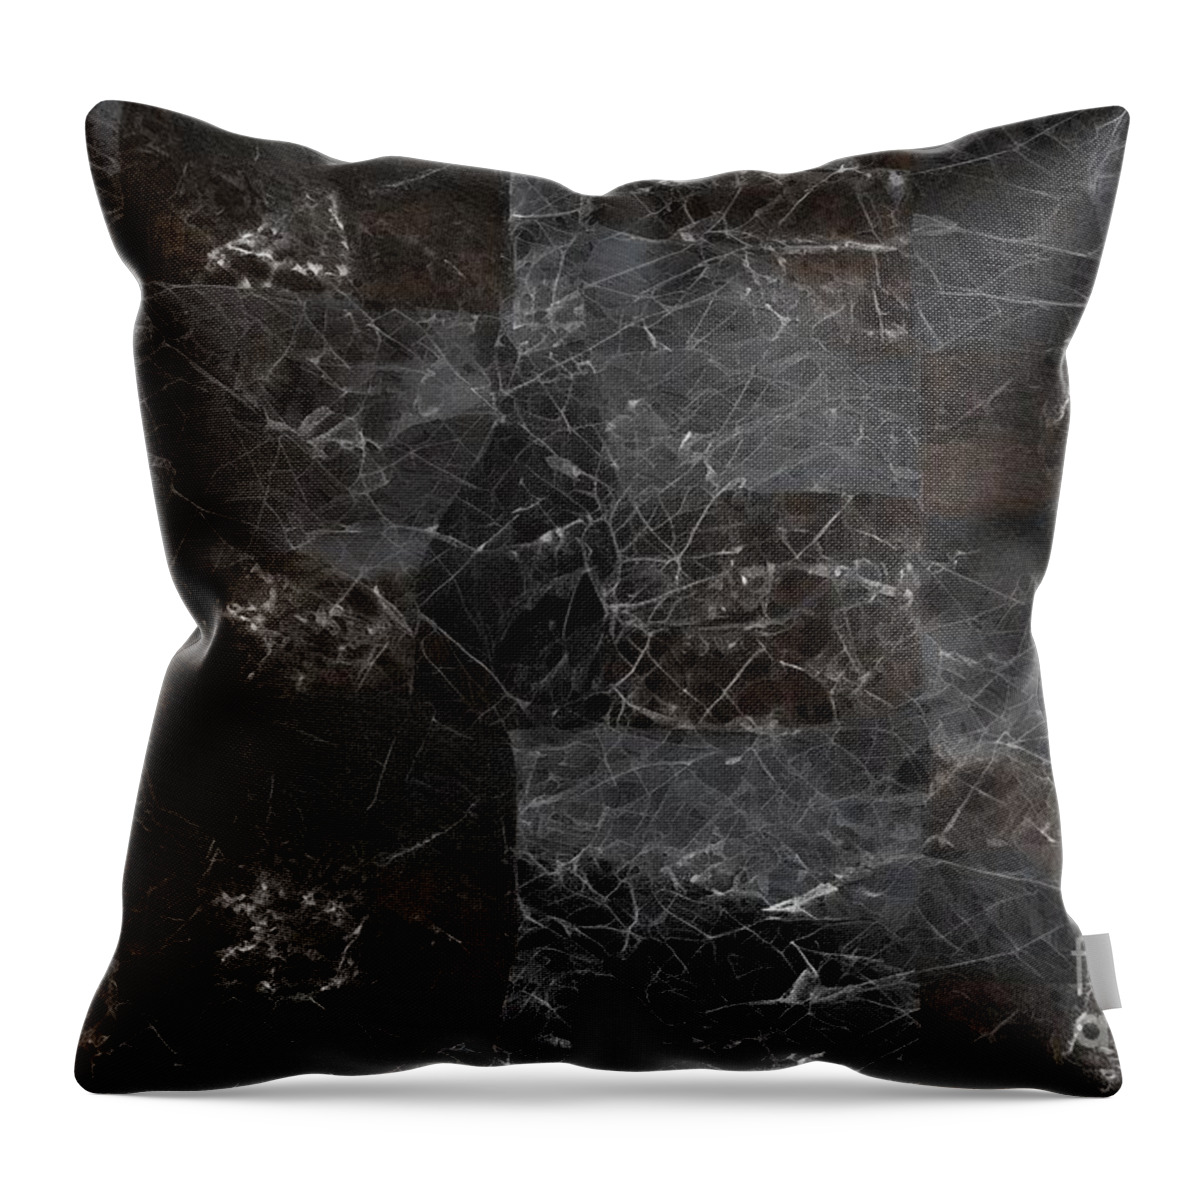 Seamless Throw Pillow featuring the painting Seamless Luxurious Rough Raw Black Onyx Mineral Slab Background Texture Tileable Dragon Stone Or Obsidian Cave Wall Repeat Pattern Luxury Concept Wallpaper Backdrop High Resolution 3d Rendering #2 by N Akkash